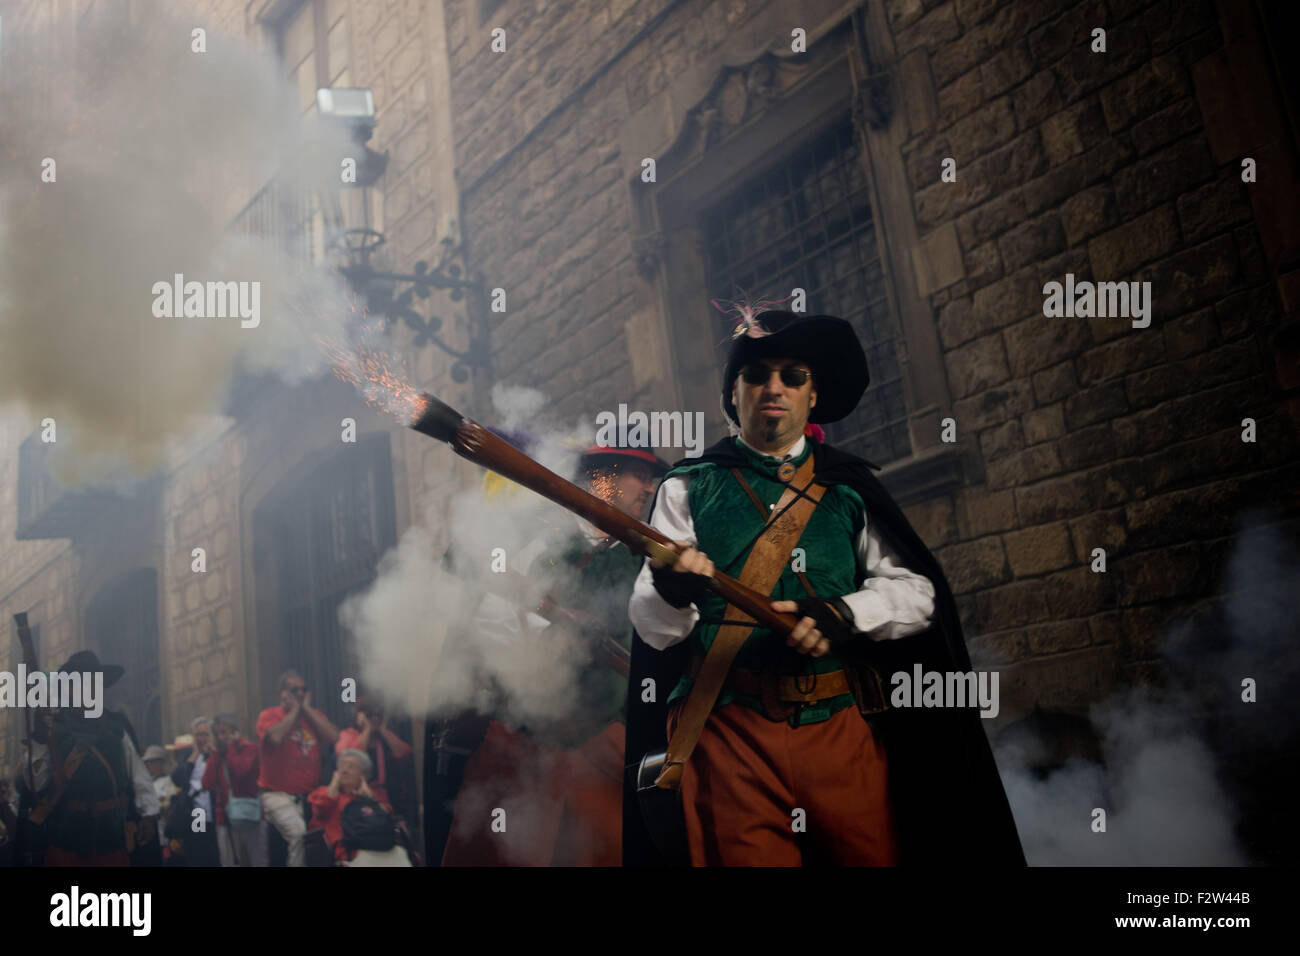 Barcelona, Spain. 24th September, 2015. A trabucaire shoots his blunderbuss through the streets of Barcelona on the occasion of the celebrations of the Merce Festival (Festes de la Merce) on 24 September 2015, Spain.  The Galejada Trabucaire marks the beginning of the day of the patron saint of Barcelona, La Merce. Men and women dressed as ancient Catalan bandits take to the streets of the old part of Barcelona and cause a loud noise with his blunderbusses full of gunpowder. Credit:   Jordi Boixareu/Alamy Live News Stock Photo